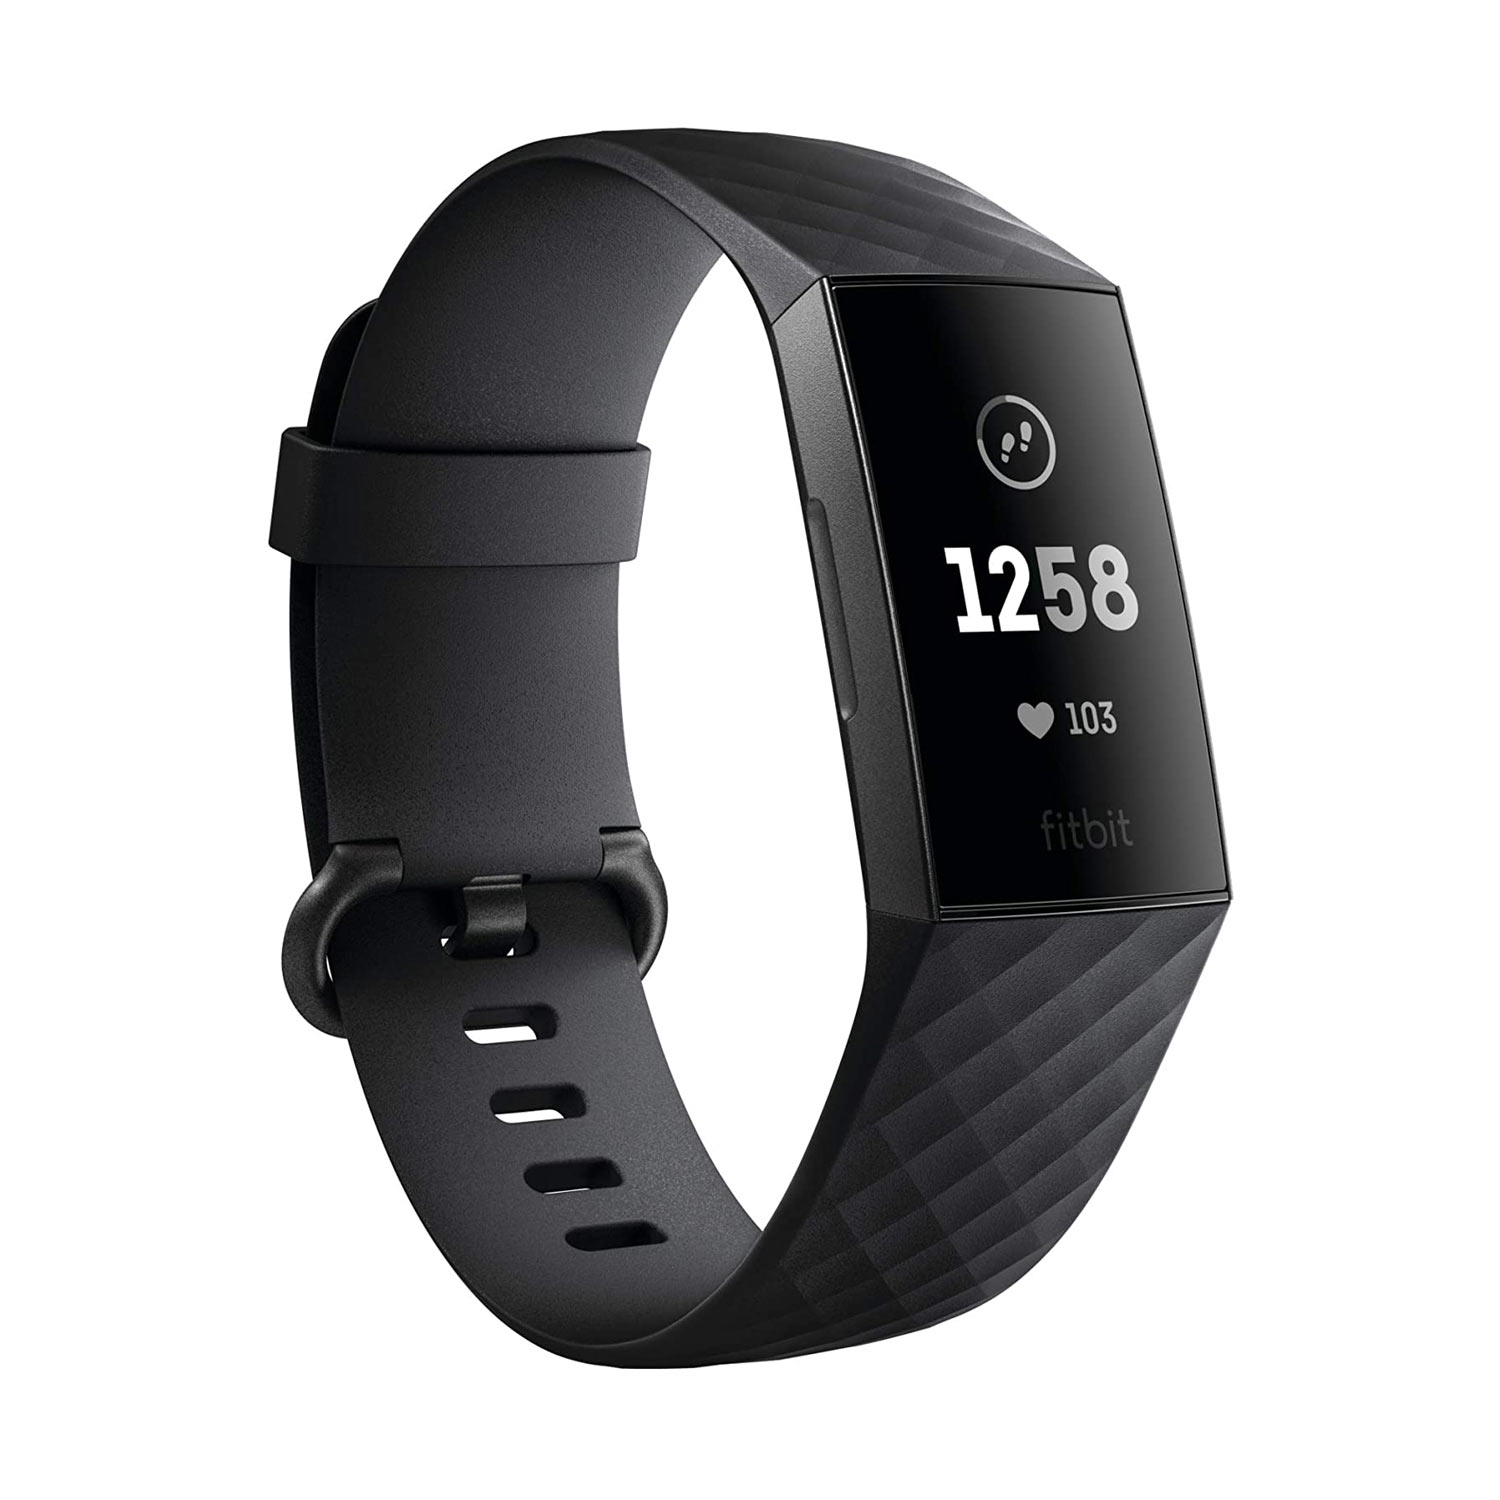 Tracker Fitbit Charge 3 FB409GMBK Graphite/Black